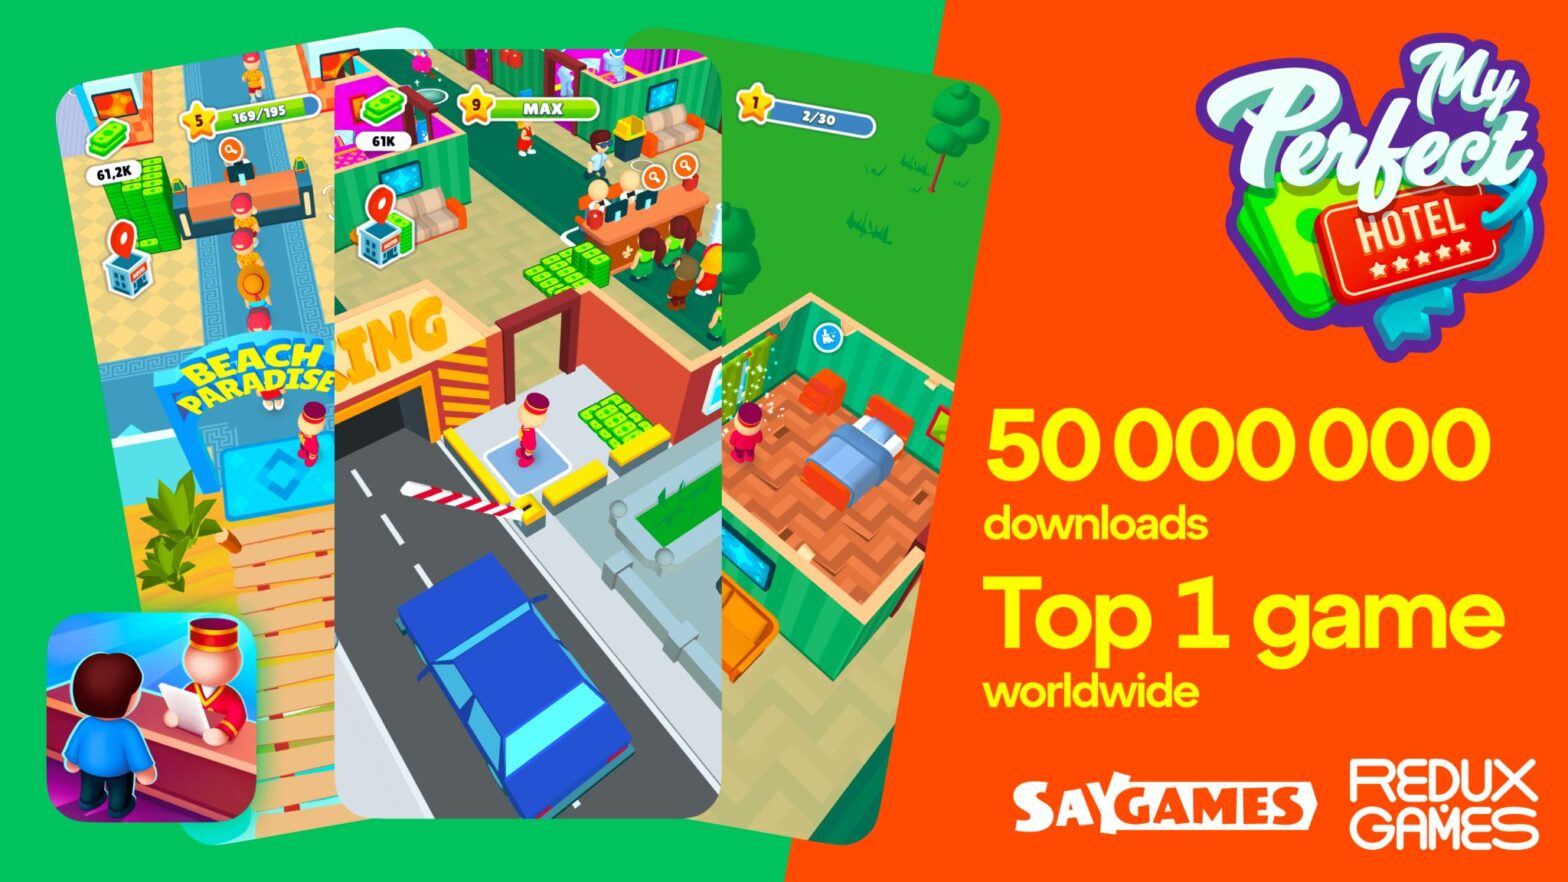 My Perfect Hotel, SayGames’ latest hybrid casual hit, becomes the most downloaded game in the world